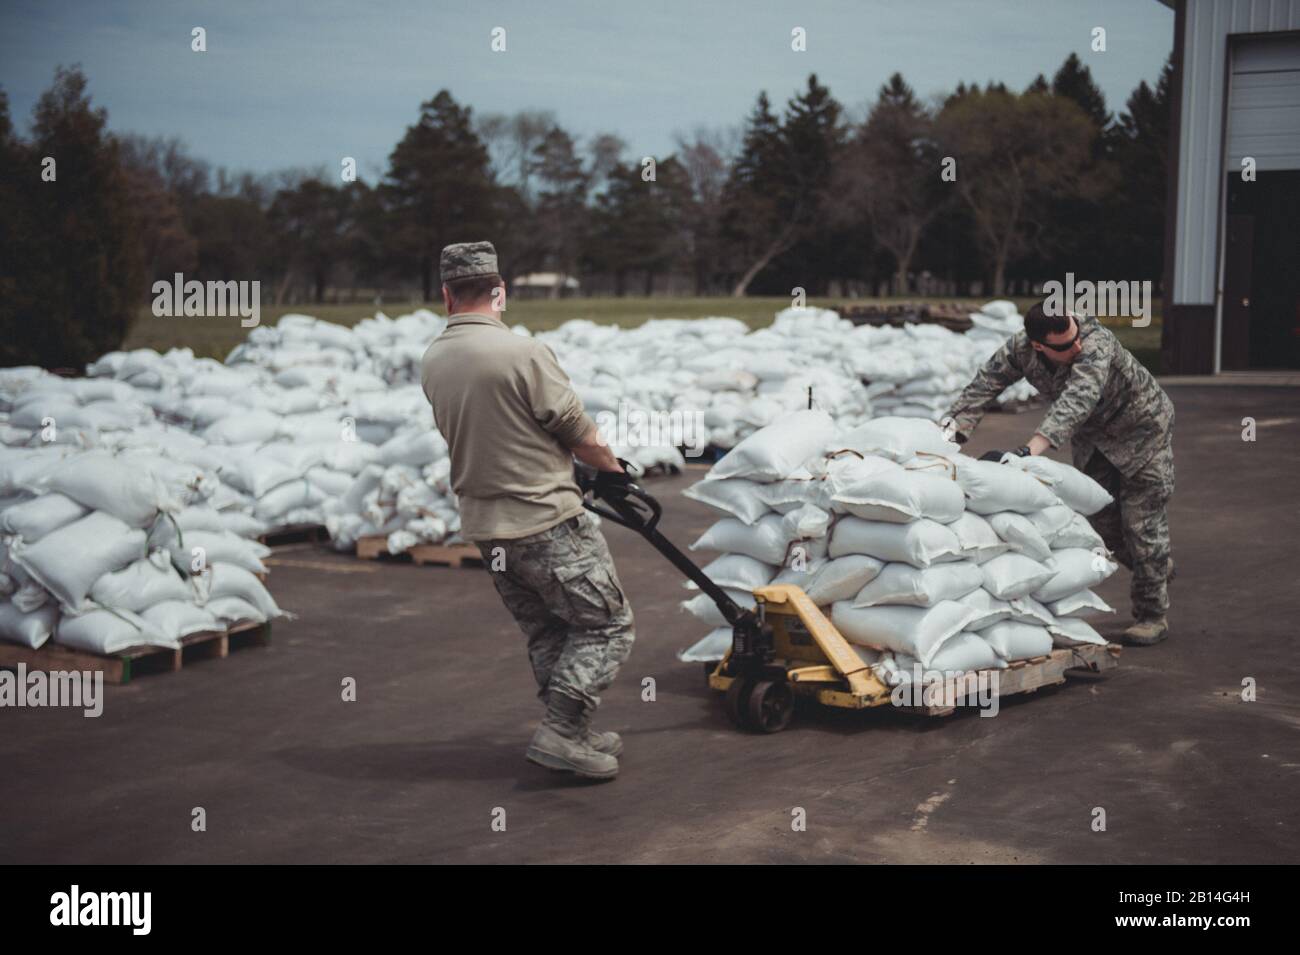 More than 30 U.S. Airmen assigned to the 107th Attack Wing, Niagara Falls Air Reserve Station, New York Air National Guard, were activated by Gov. Andrew Cuomo to respond to rising water levels in Lake Ontario which has led to flooding and a state of emergency, Olcott, N.Y., May 12, 2017. The Airmen filled more than 47,000 sandbags to be deployed throughout the Lake Ontario area to hold back flooding since being activated  May 9. (U.S. Air National Guard photo by Staff Sgt. Ryan Campbell) Stock Photo